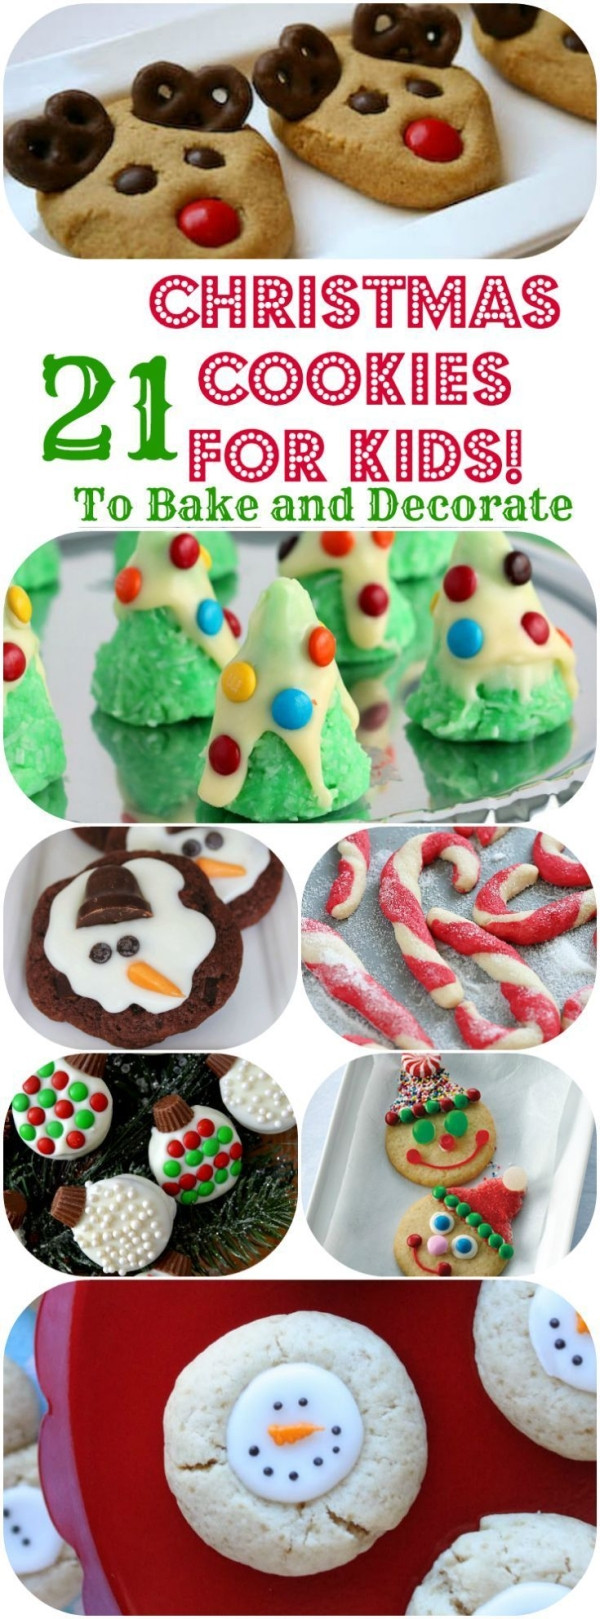 Easy Christmas Cookies For Kids
 Easy Christmas Cookie recipes for Kids to Bake or Decorate